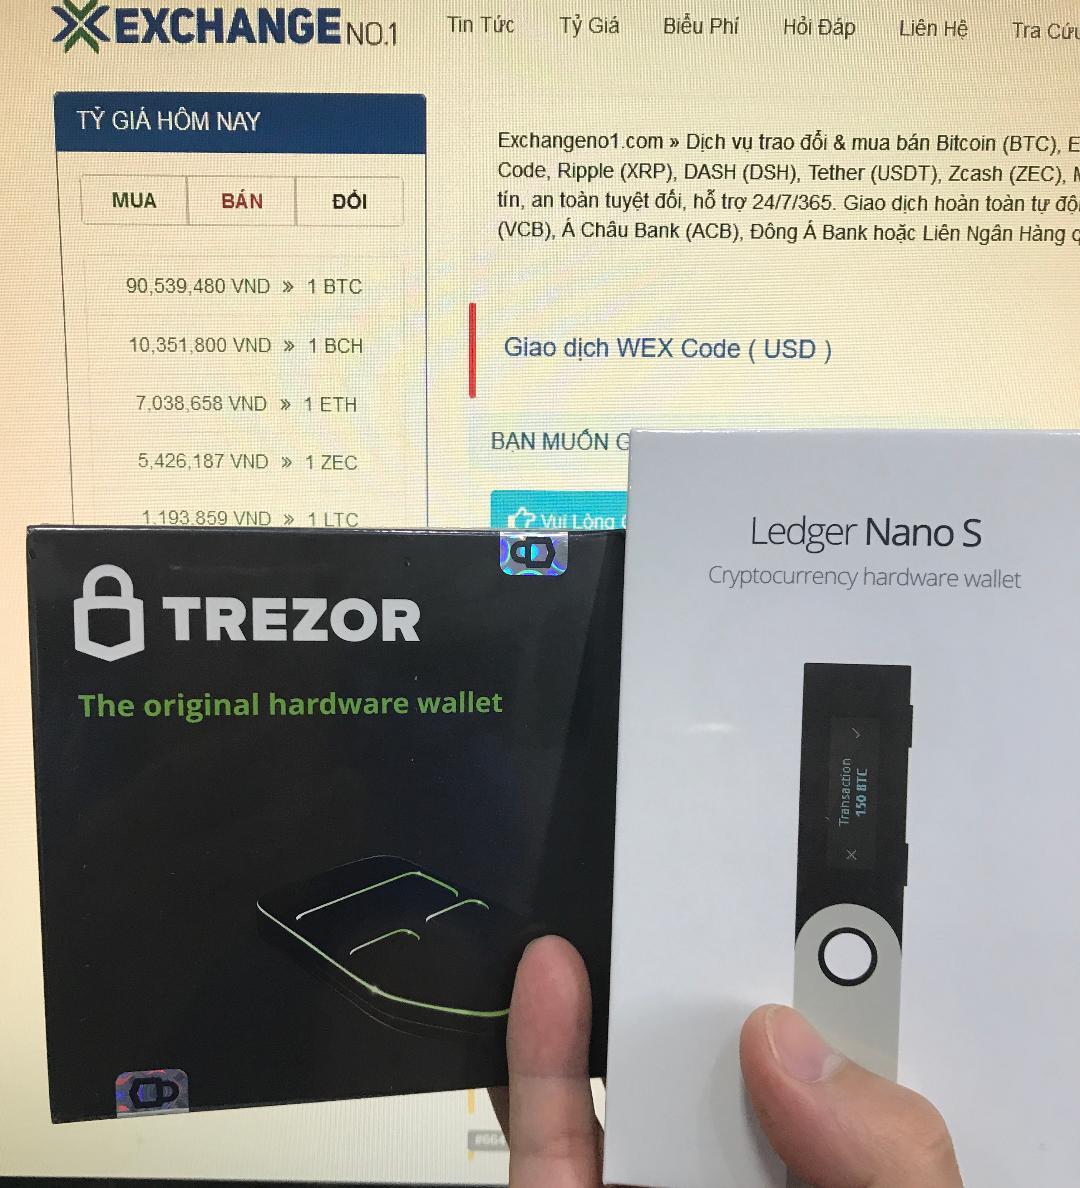 Which Cryptocoins Does Trezor Hardware Wallet Support?